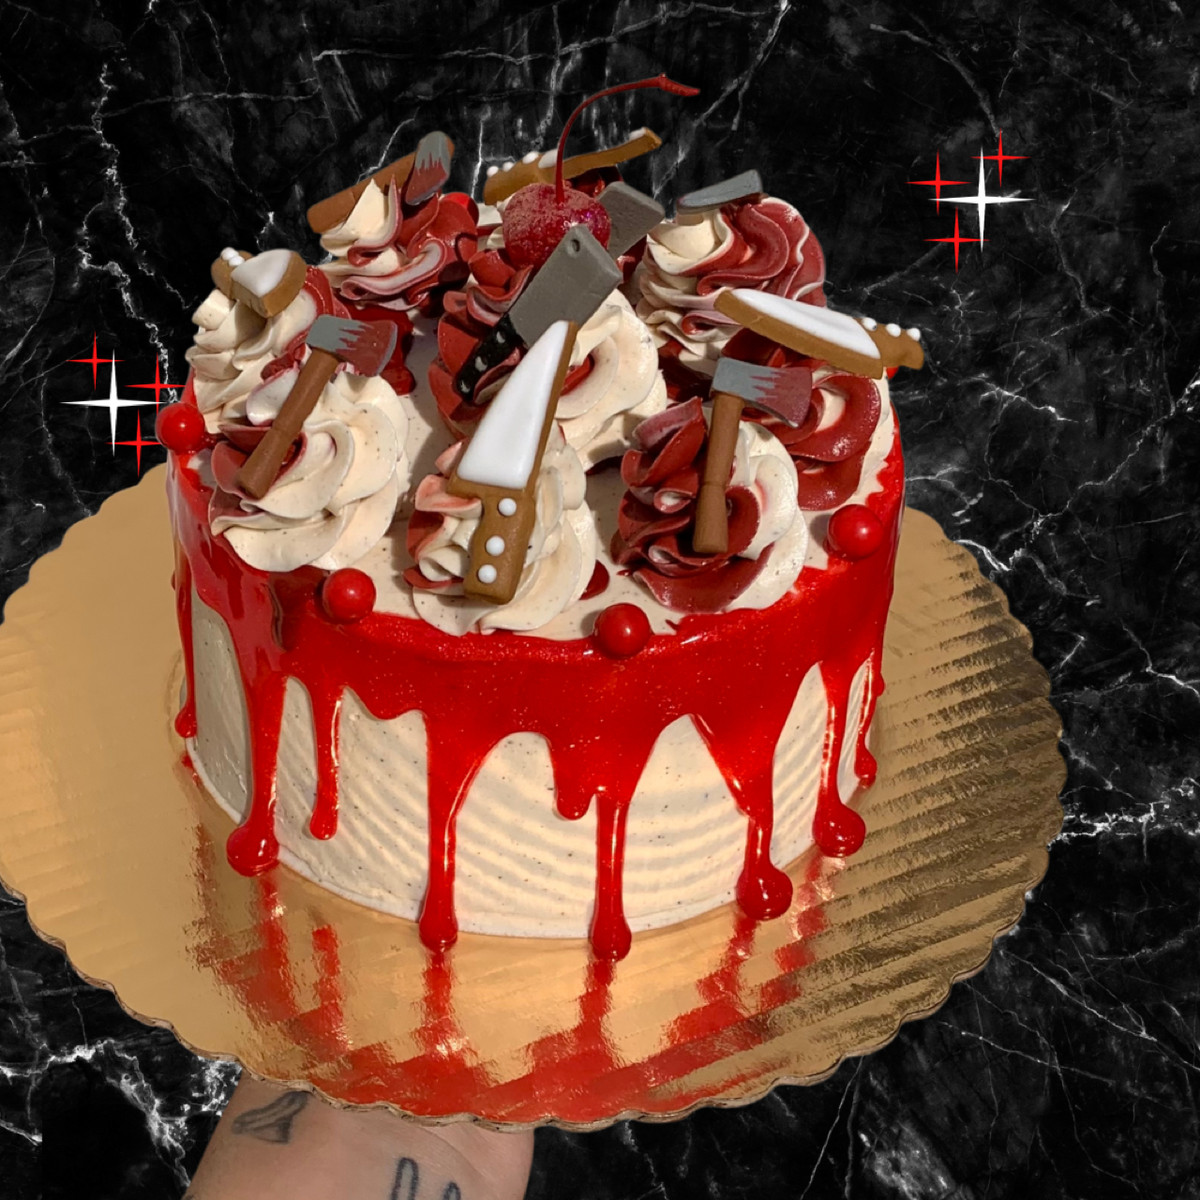 A white cake on a gold platter with red dripping icing topped with knife cookies and hatchet cookies.